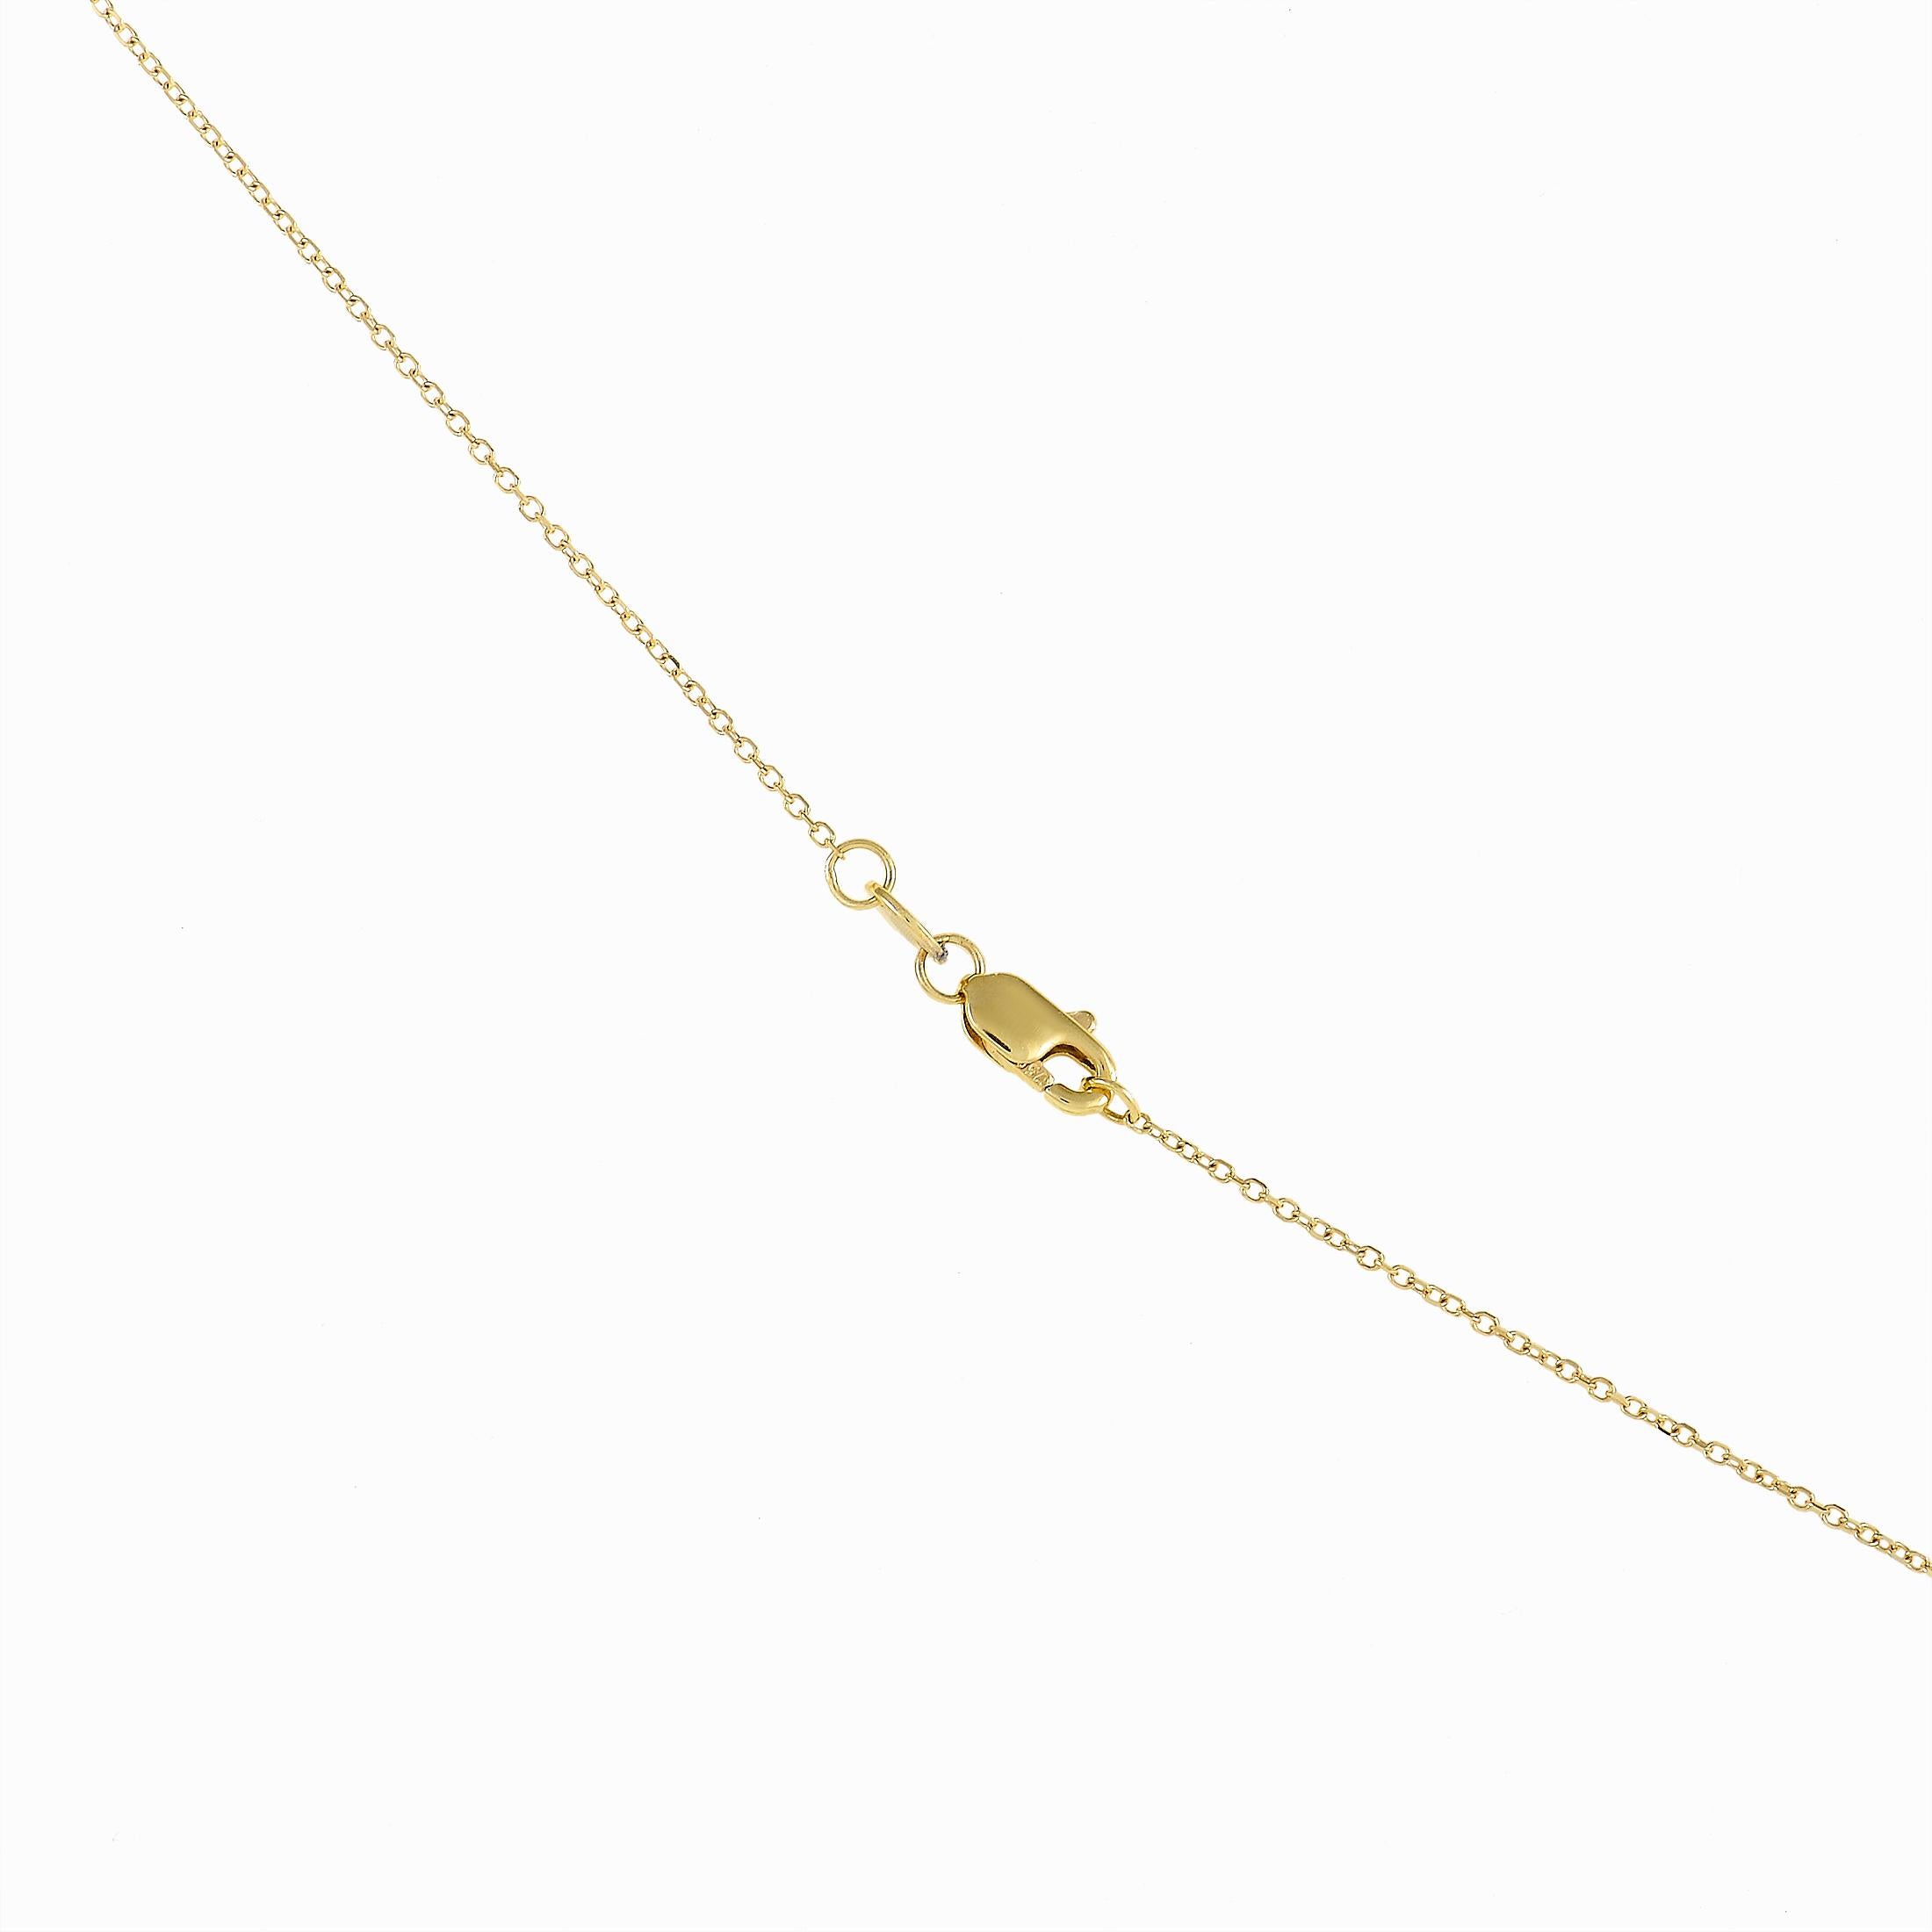 This sleek, simple pendant necklace is a piece that will elevate any ensemble. Crafted from 14K yellow gold, a pendant measuring 1.5” long and 0.5” wide is elegantly suspended from an 16” chain. The gracefully curved design of the pendant is made